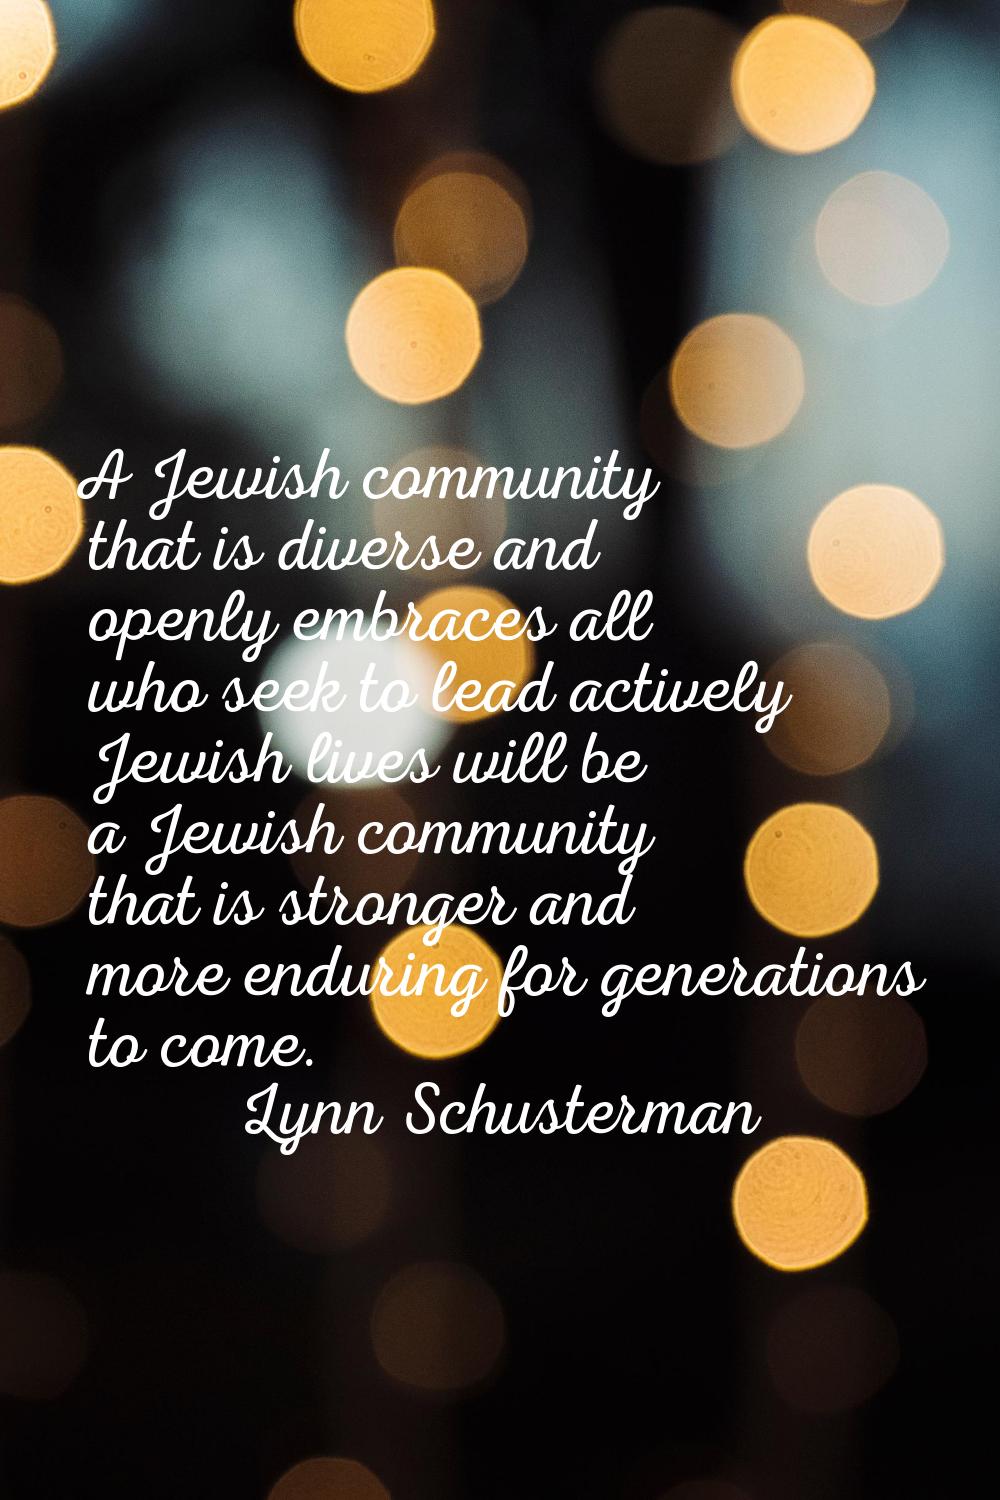 A Jewish community that is diverse and openly embraces all who seek to lead actively Jewish lives w